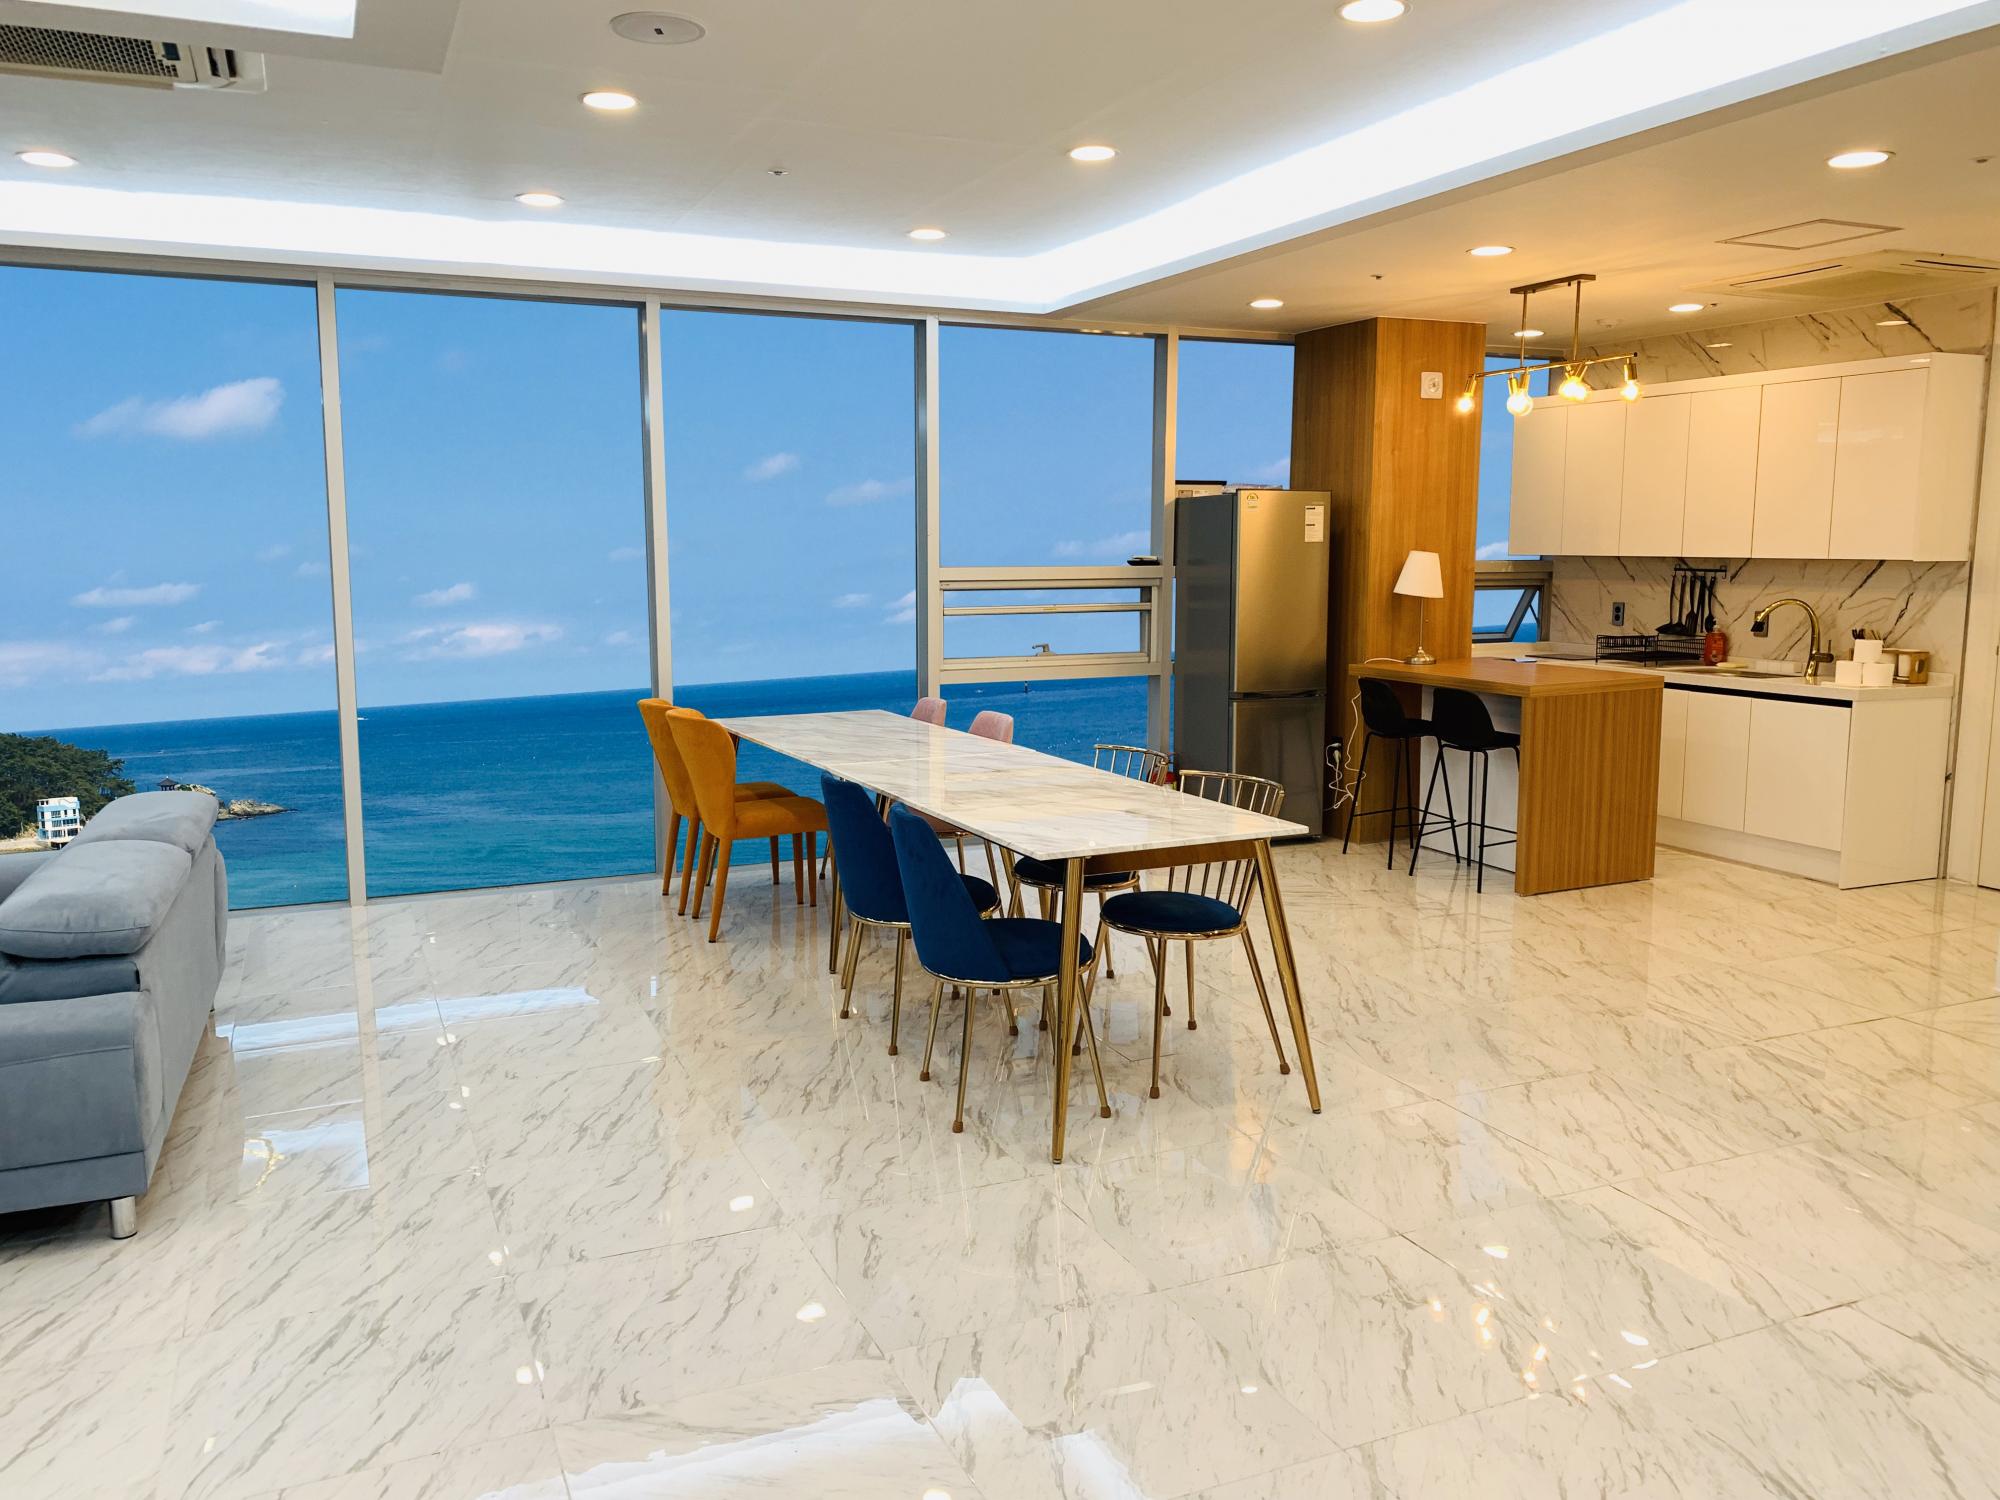 Property Image 2 - Panorama Oceanview home in Busan 2